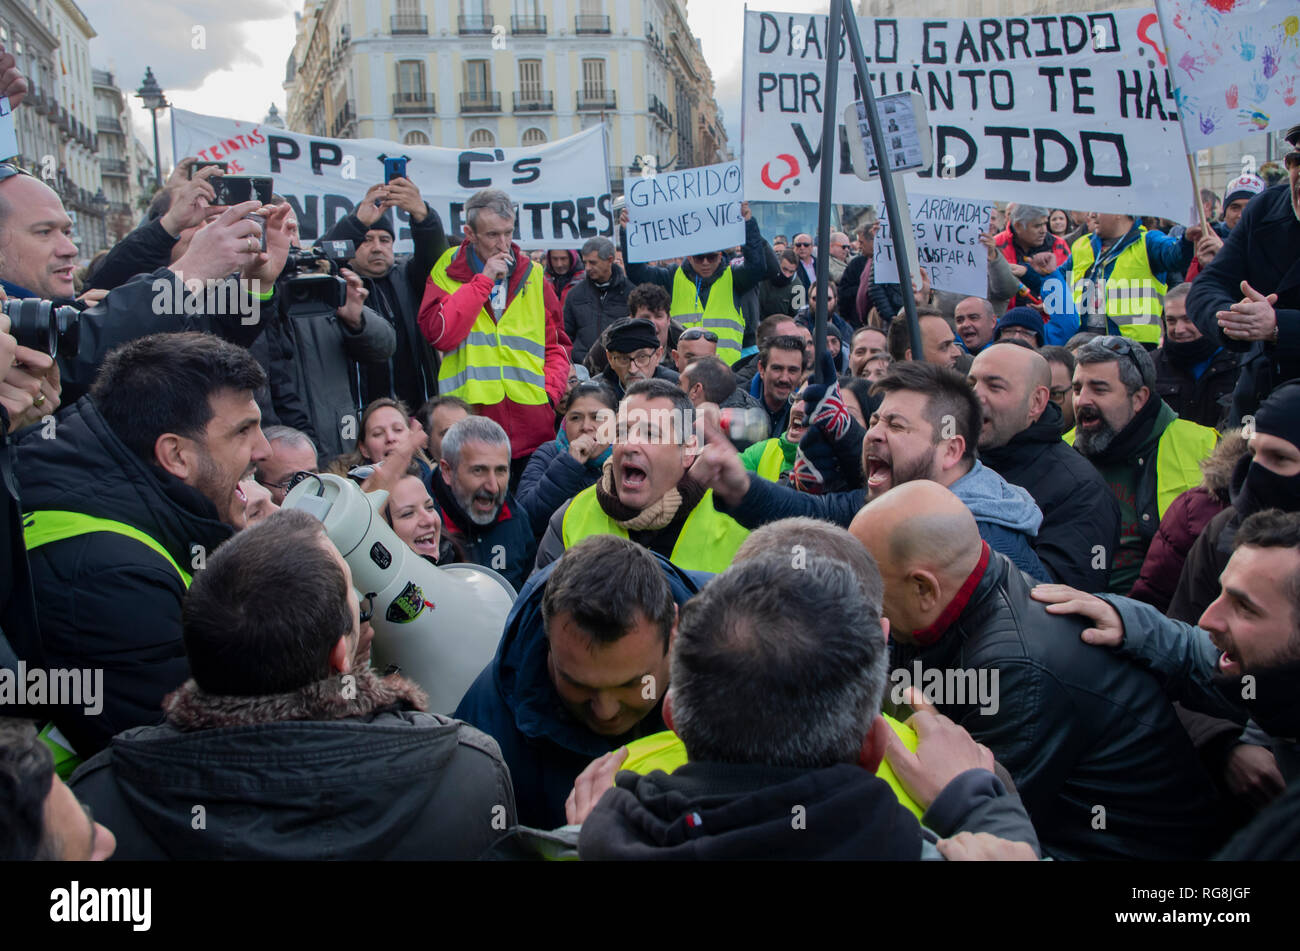 Madrid, Spain. 28th January 2019. Taxi drivers in Madrid have been on a strike for more than a week demanding the prohibition of Uber and Cabify in the Spanish capital-city.   Due to a lack of agreement, hundreds of taxi drivers protested at Puerta del Sol, Madrid’s central square.  In the pictures taxi drivers are angrily protesting. Credit: Lora Grigorova/Alamy Live News Stock Photo